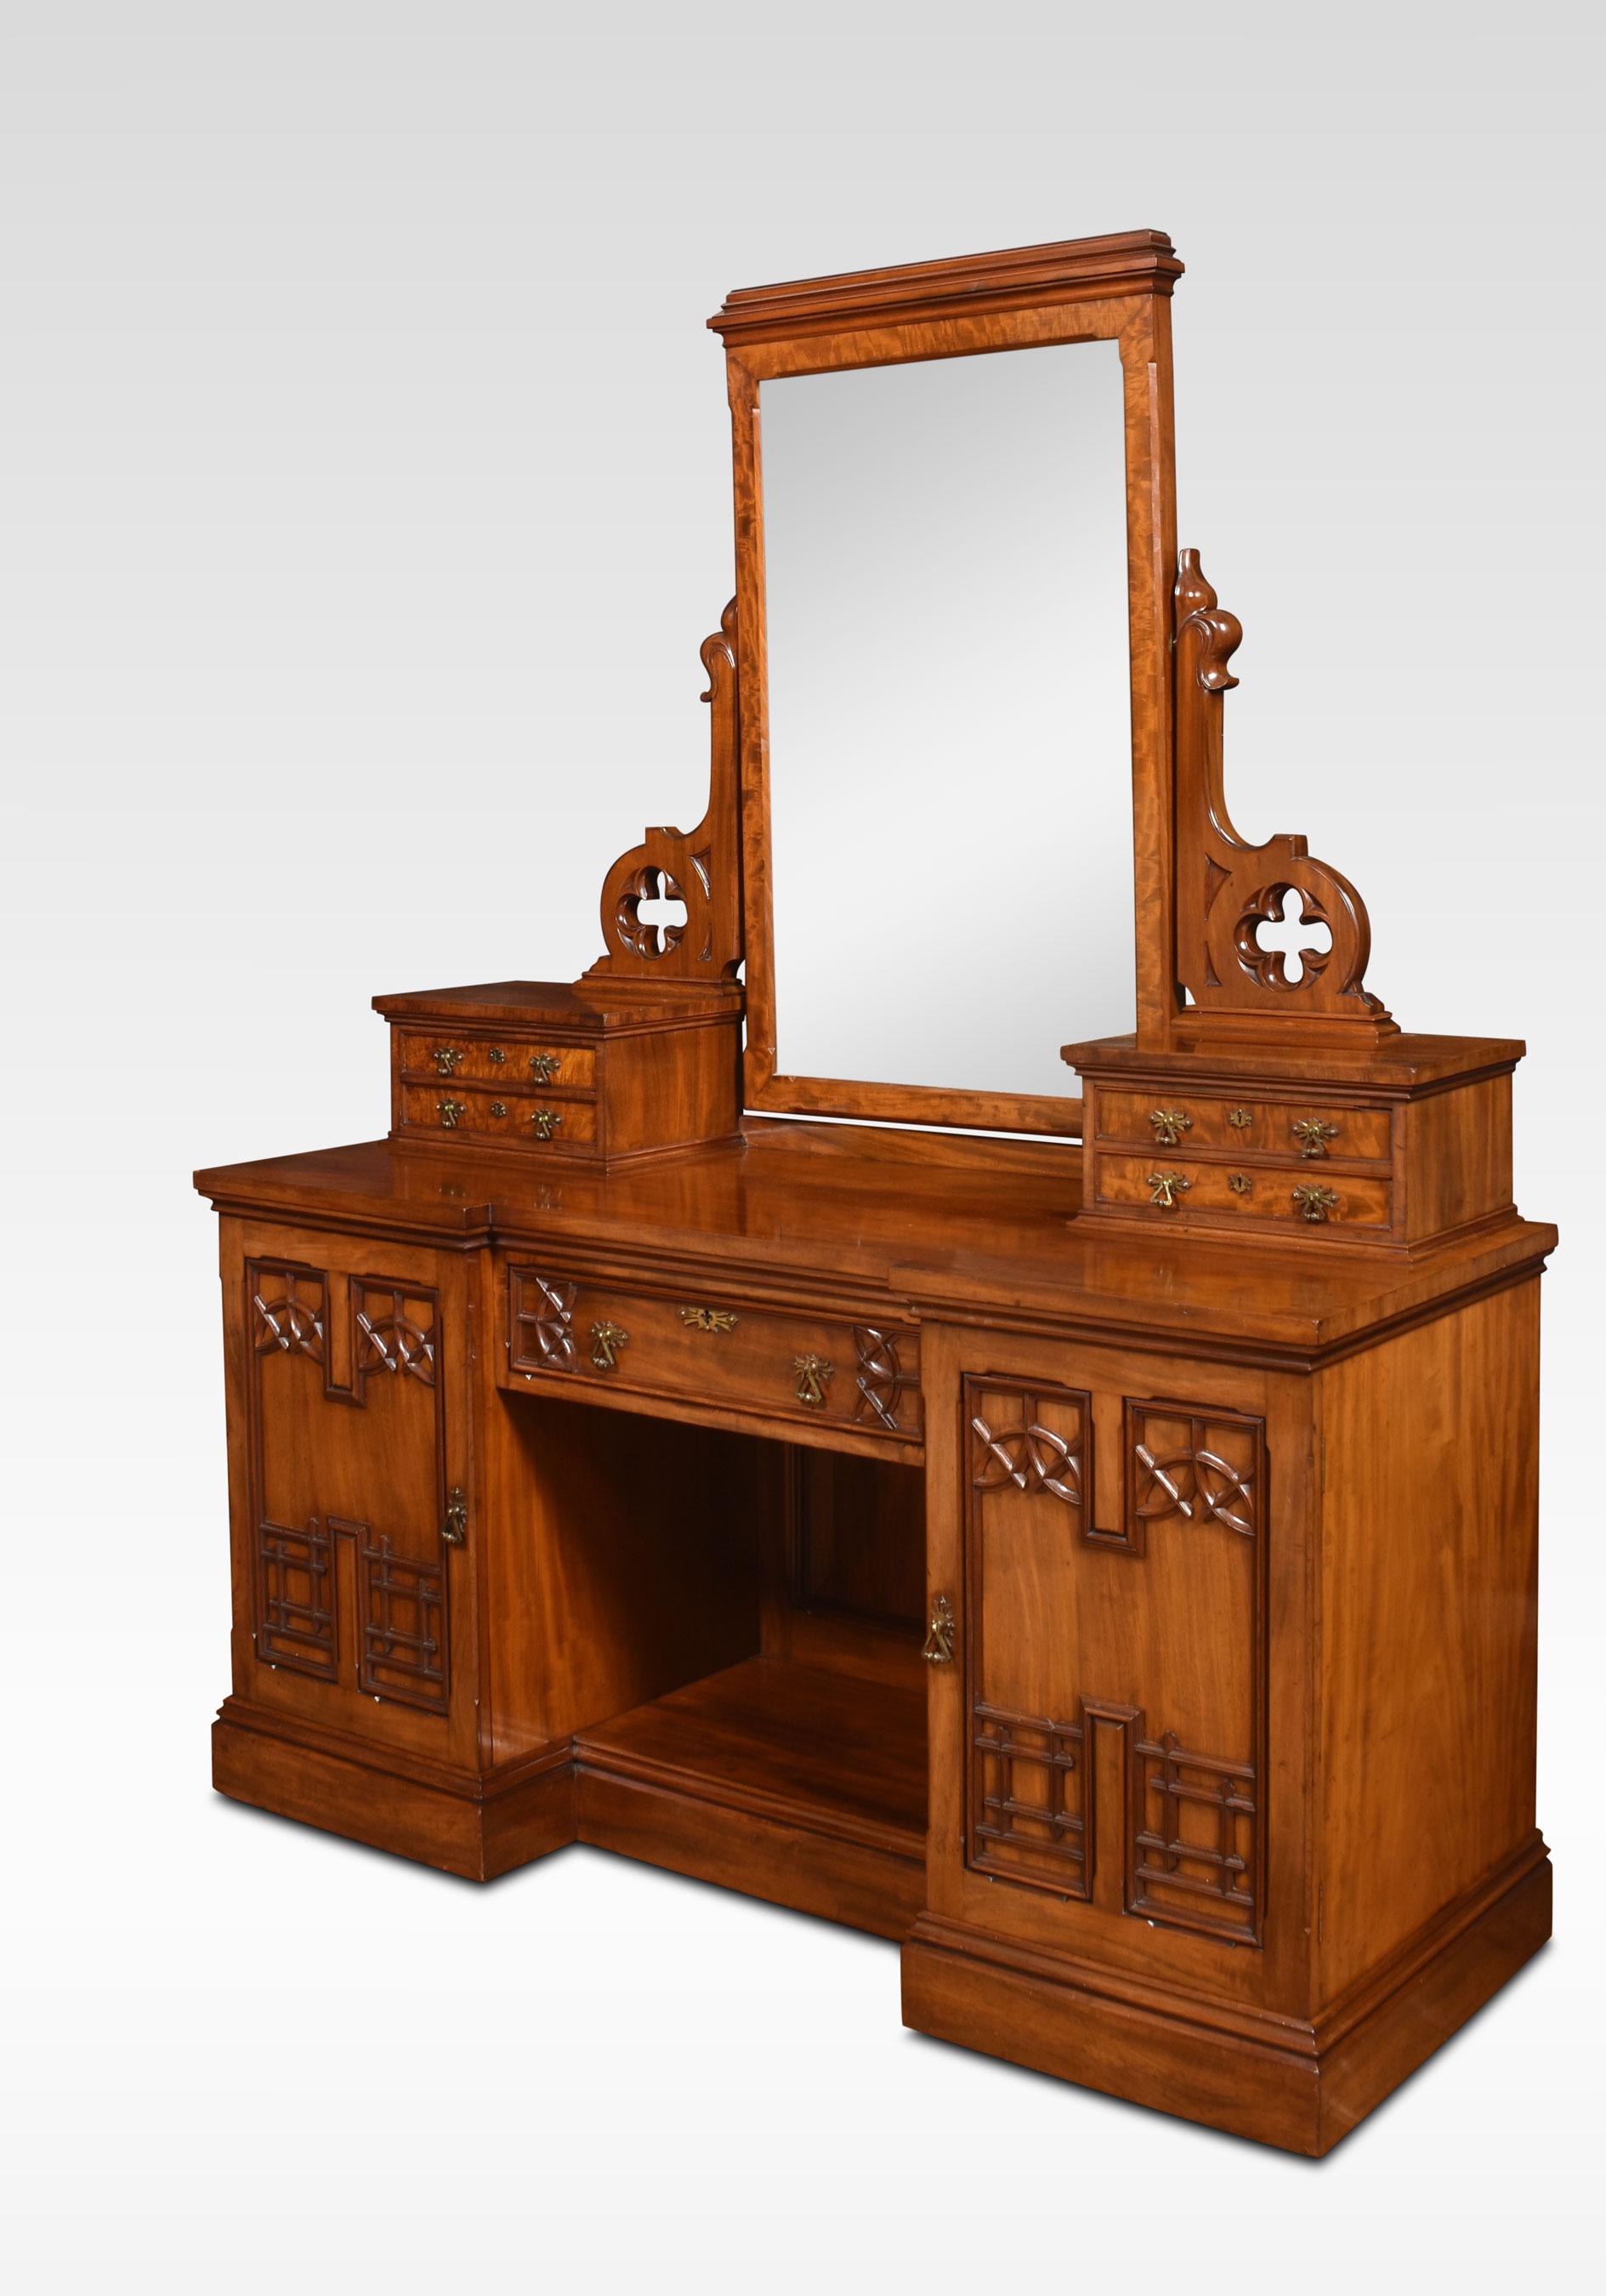 Gothic Revival Mahogany Dressing Table In Good Condition For Sale In Cheshire, GB